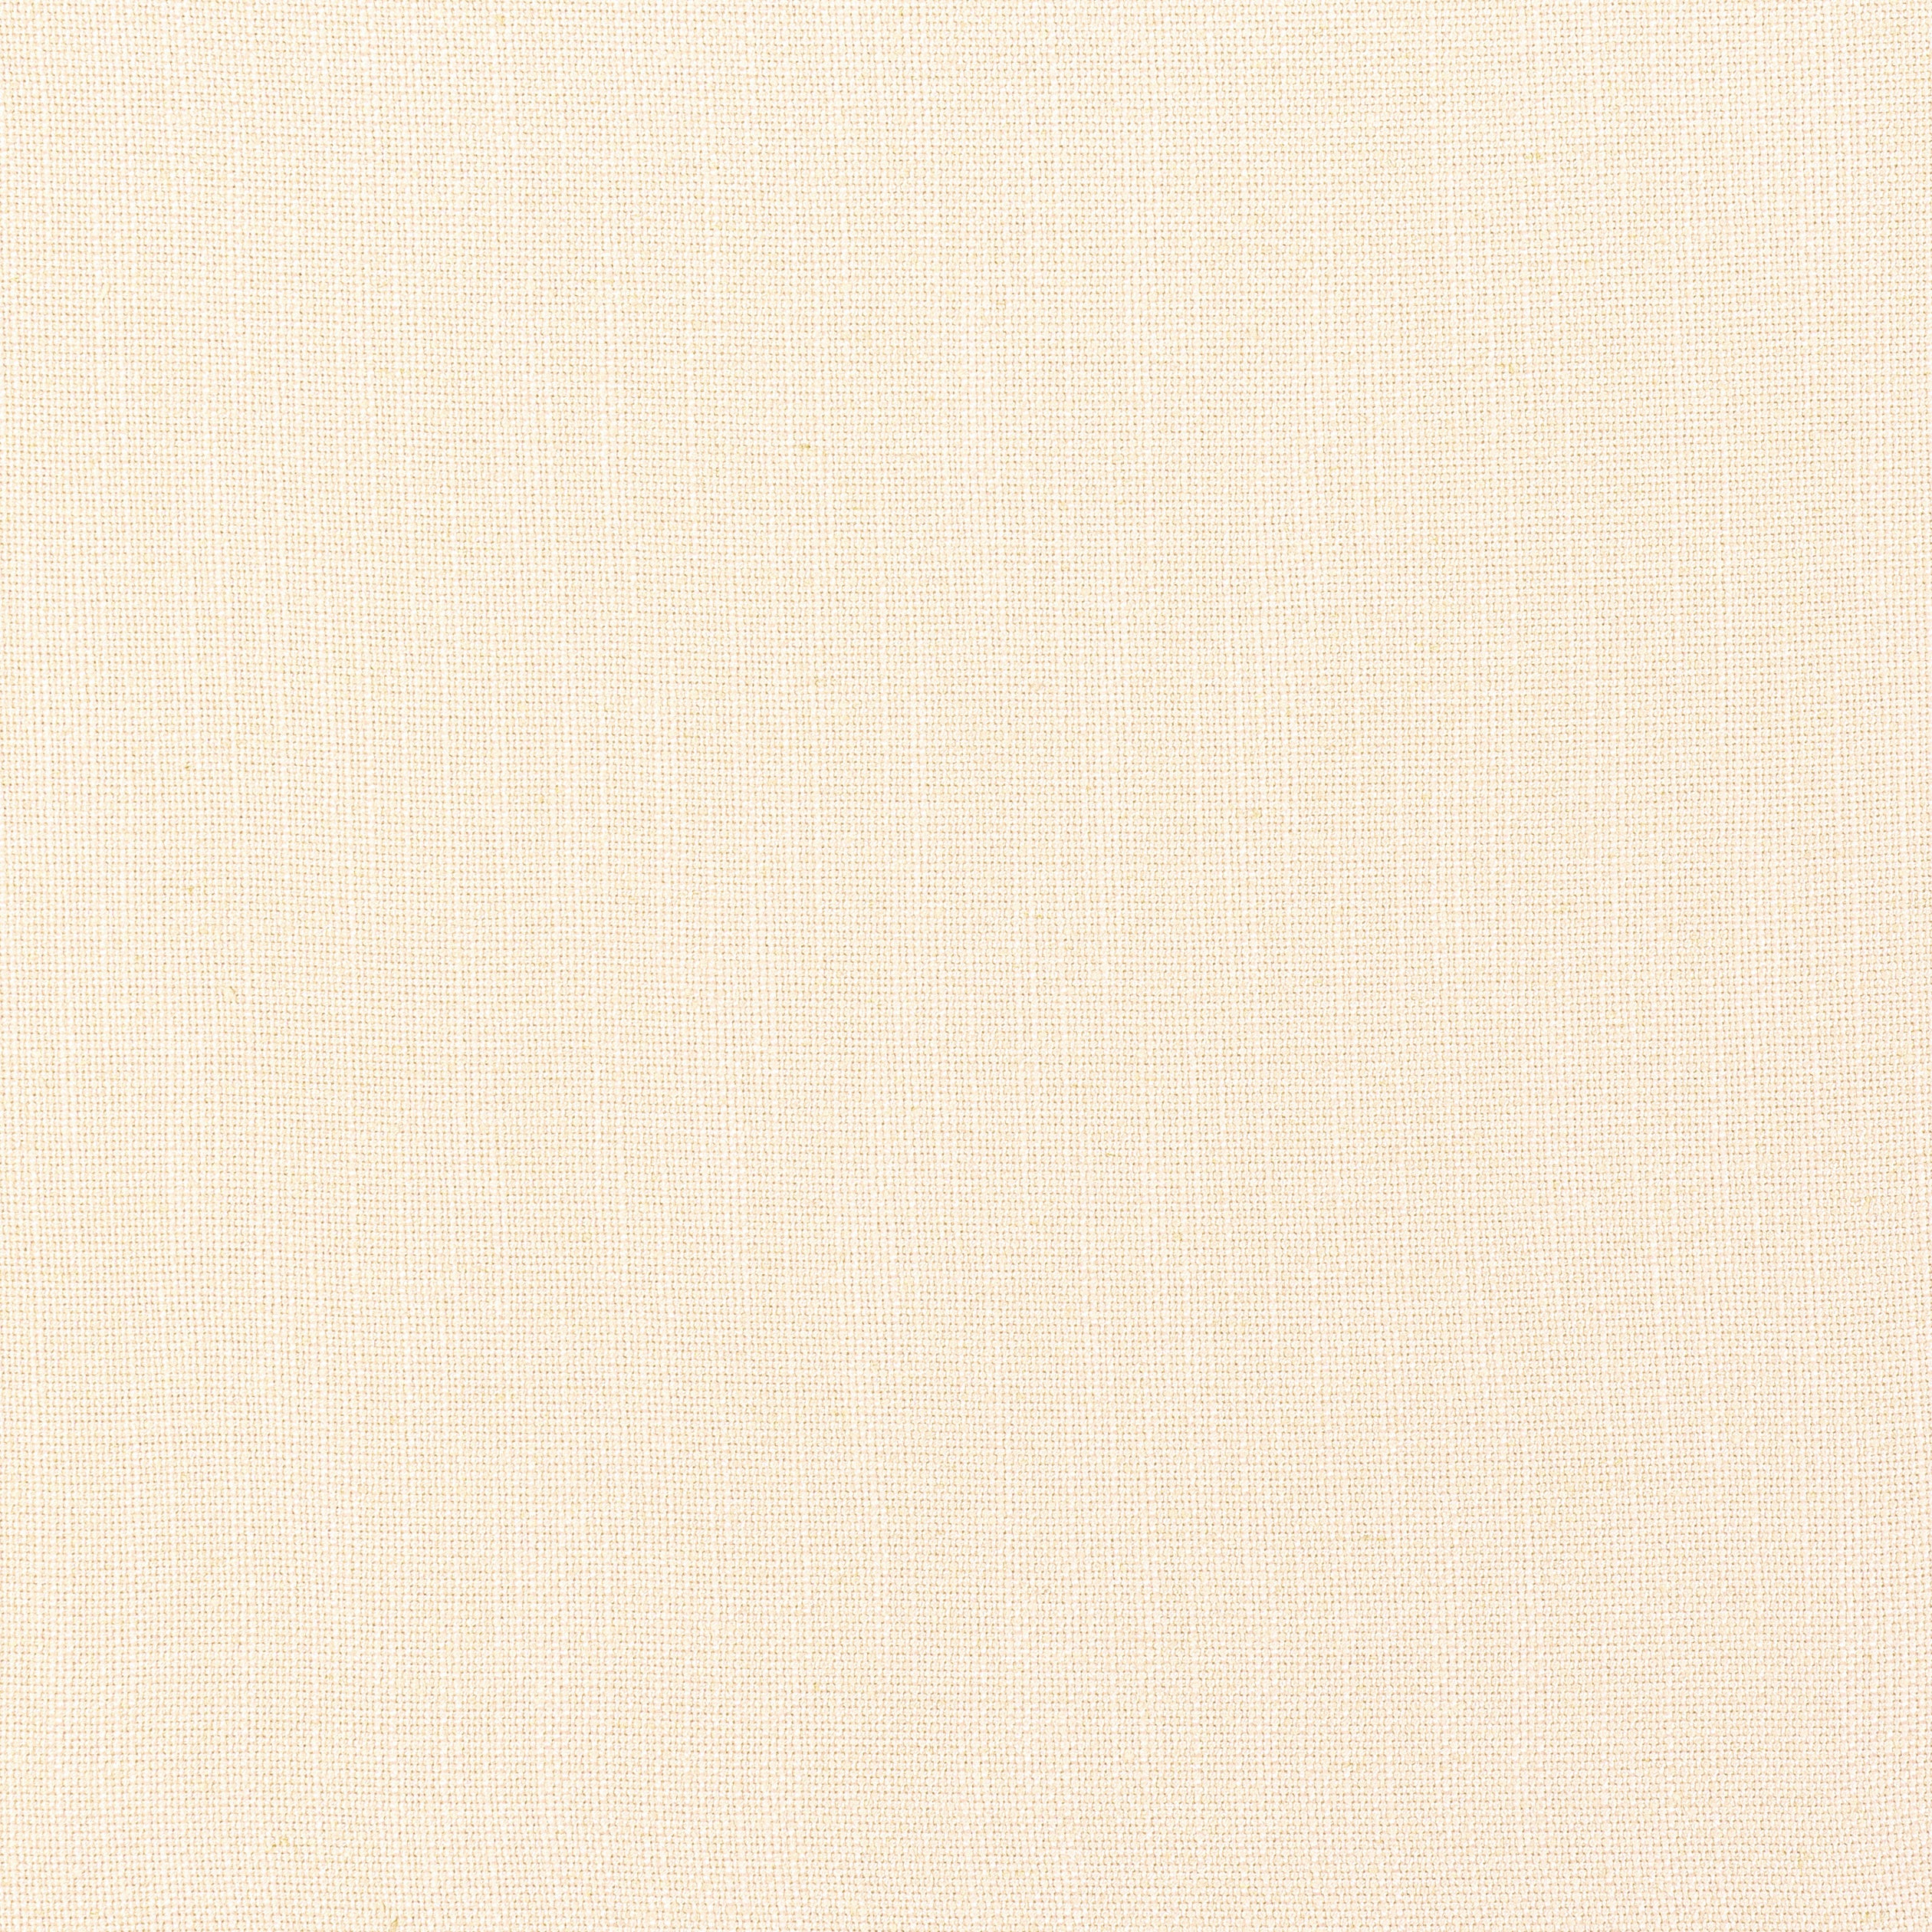 Palisade Linen fabric in parchment color - pattern number FWW7626 - by Thibaut in the Palisades collection